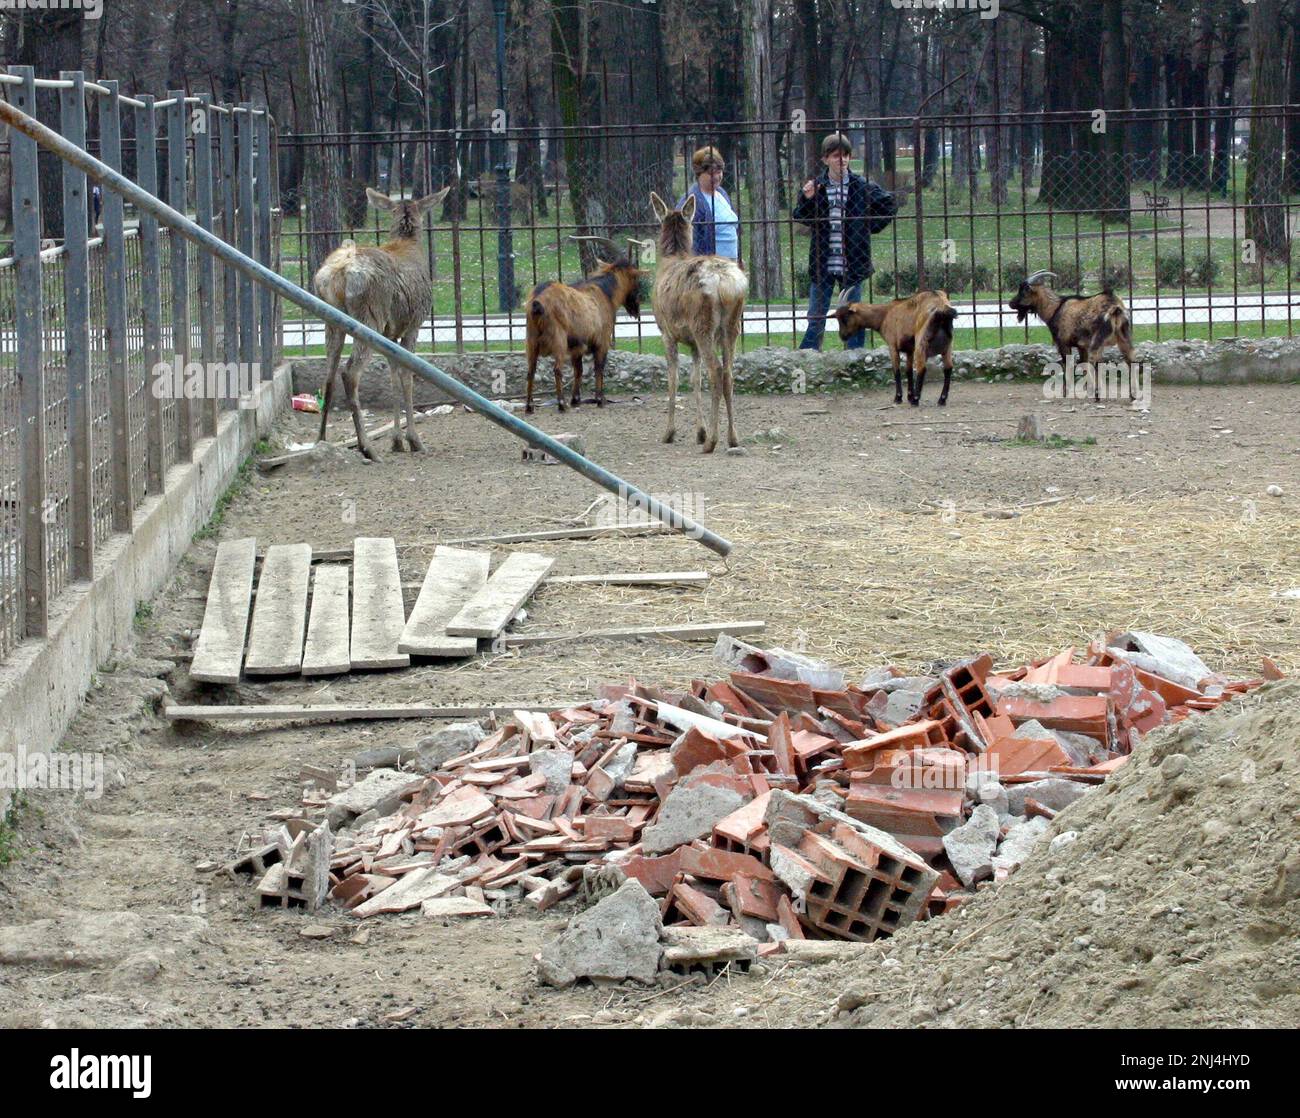 Skopje Zoo photographed March 2004. These photographs led to a number of press articles criticising the conditions at the Zoo.  Over the years the zoo received much criticism for the living conditions of its animals. In 2008 the City allocated 42 million denar in funds to improve the zoo, and the zoo started working with the European Association of Zoos and Aquaria (EAZA) to bring the zoo up to modern standards. By 2010 new enclosures had been built, 85% of the older exhibits at the zoo had been renovated,  the zoo became an EAZA membership candidate. Picture garyroberts/worldwidefeatures.com Stock Photo